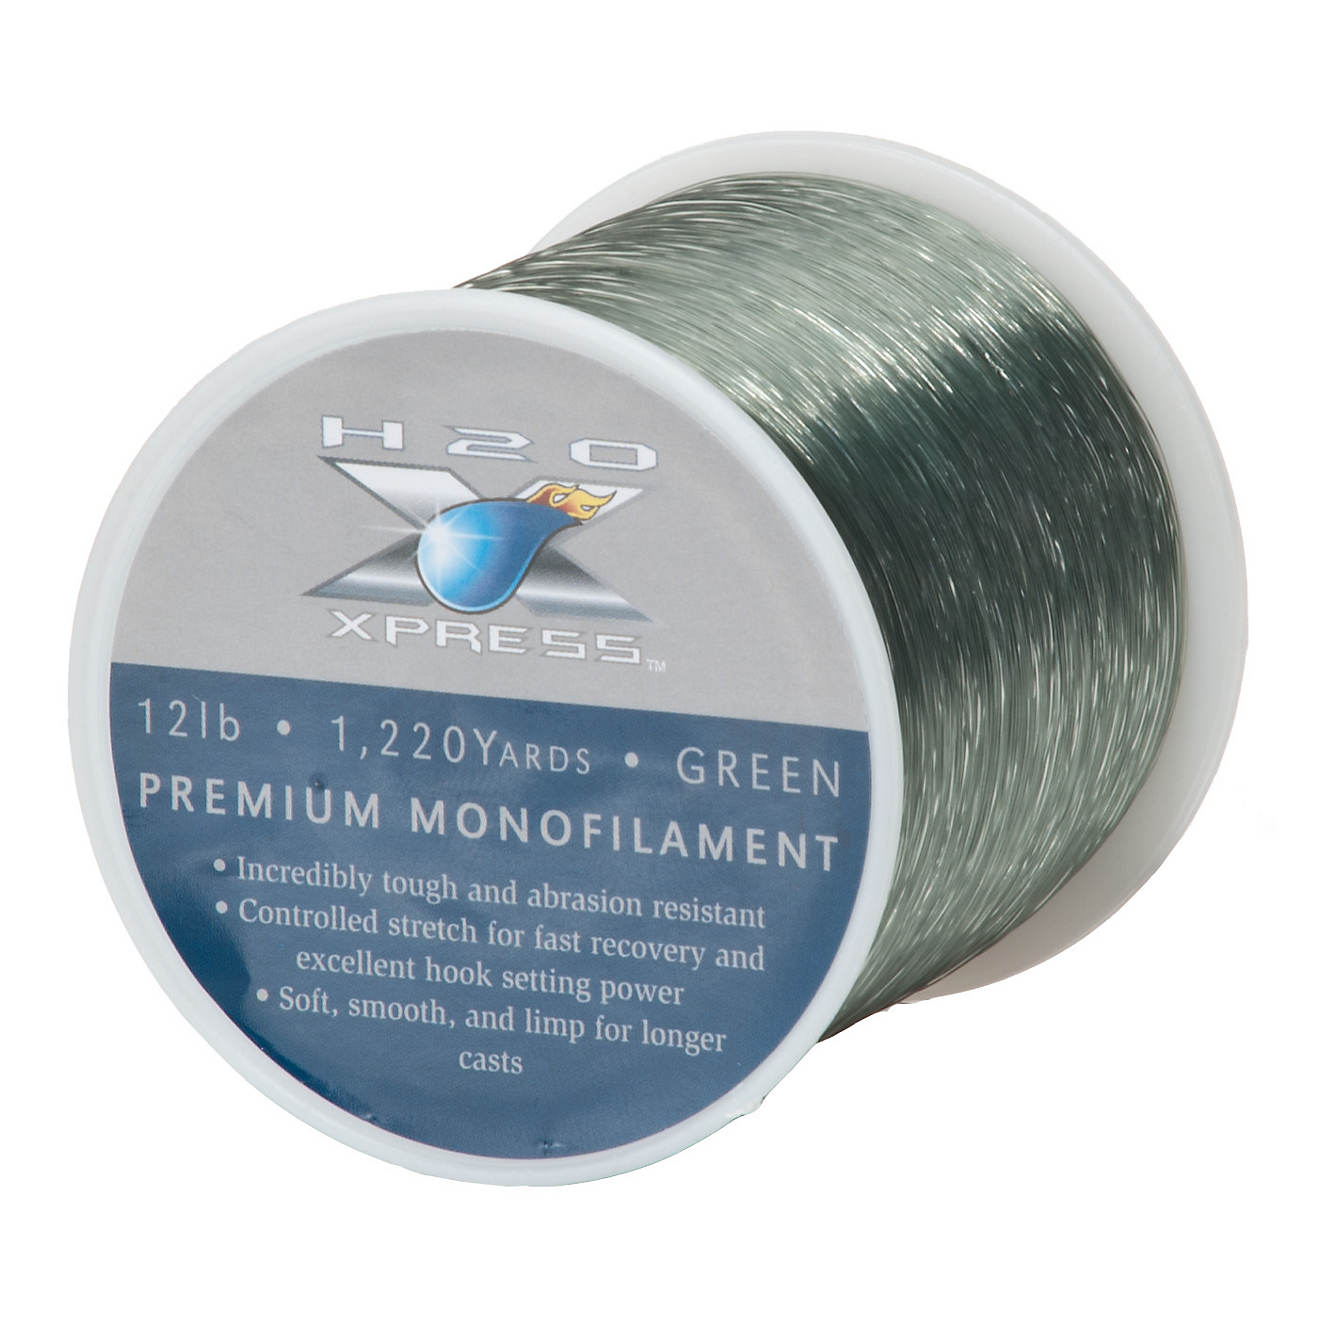 H2O XPRESS 12 lb - 1,220 yd Monofilament Fishing Line                                                                            - view number 1